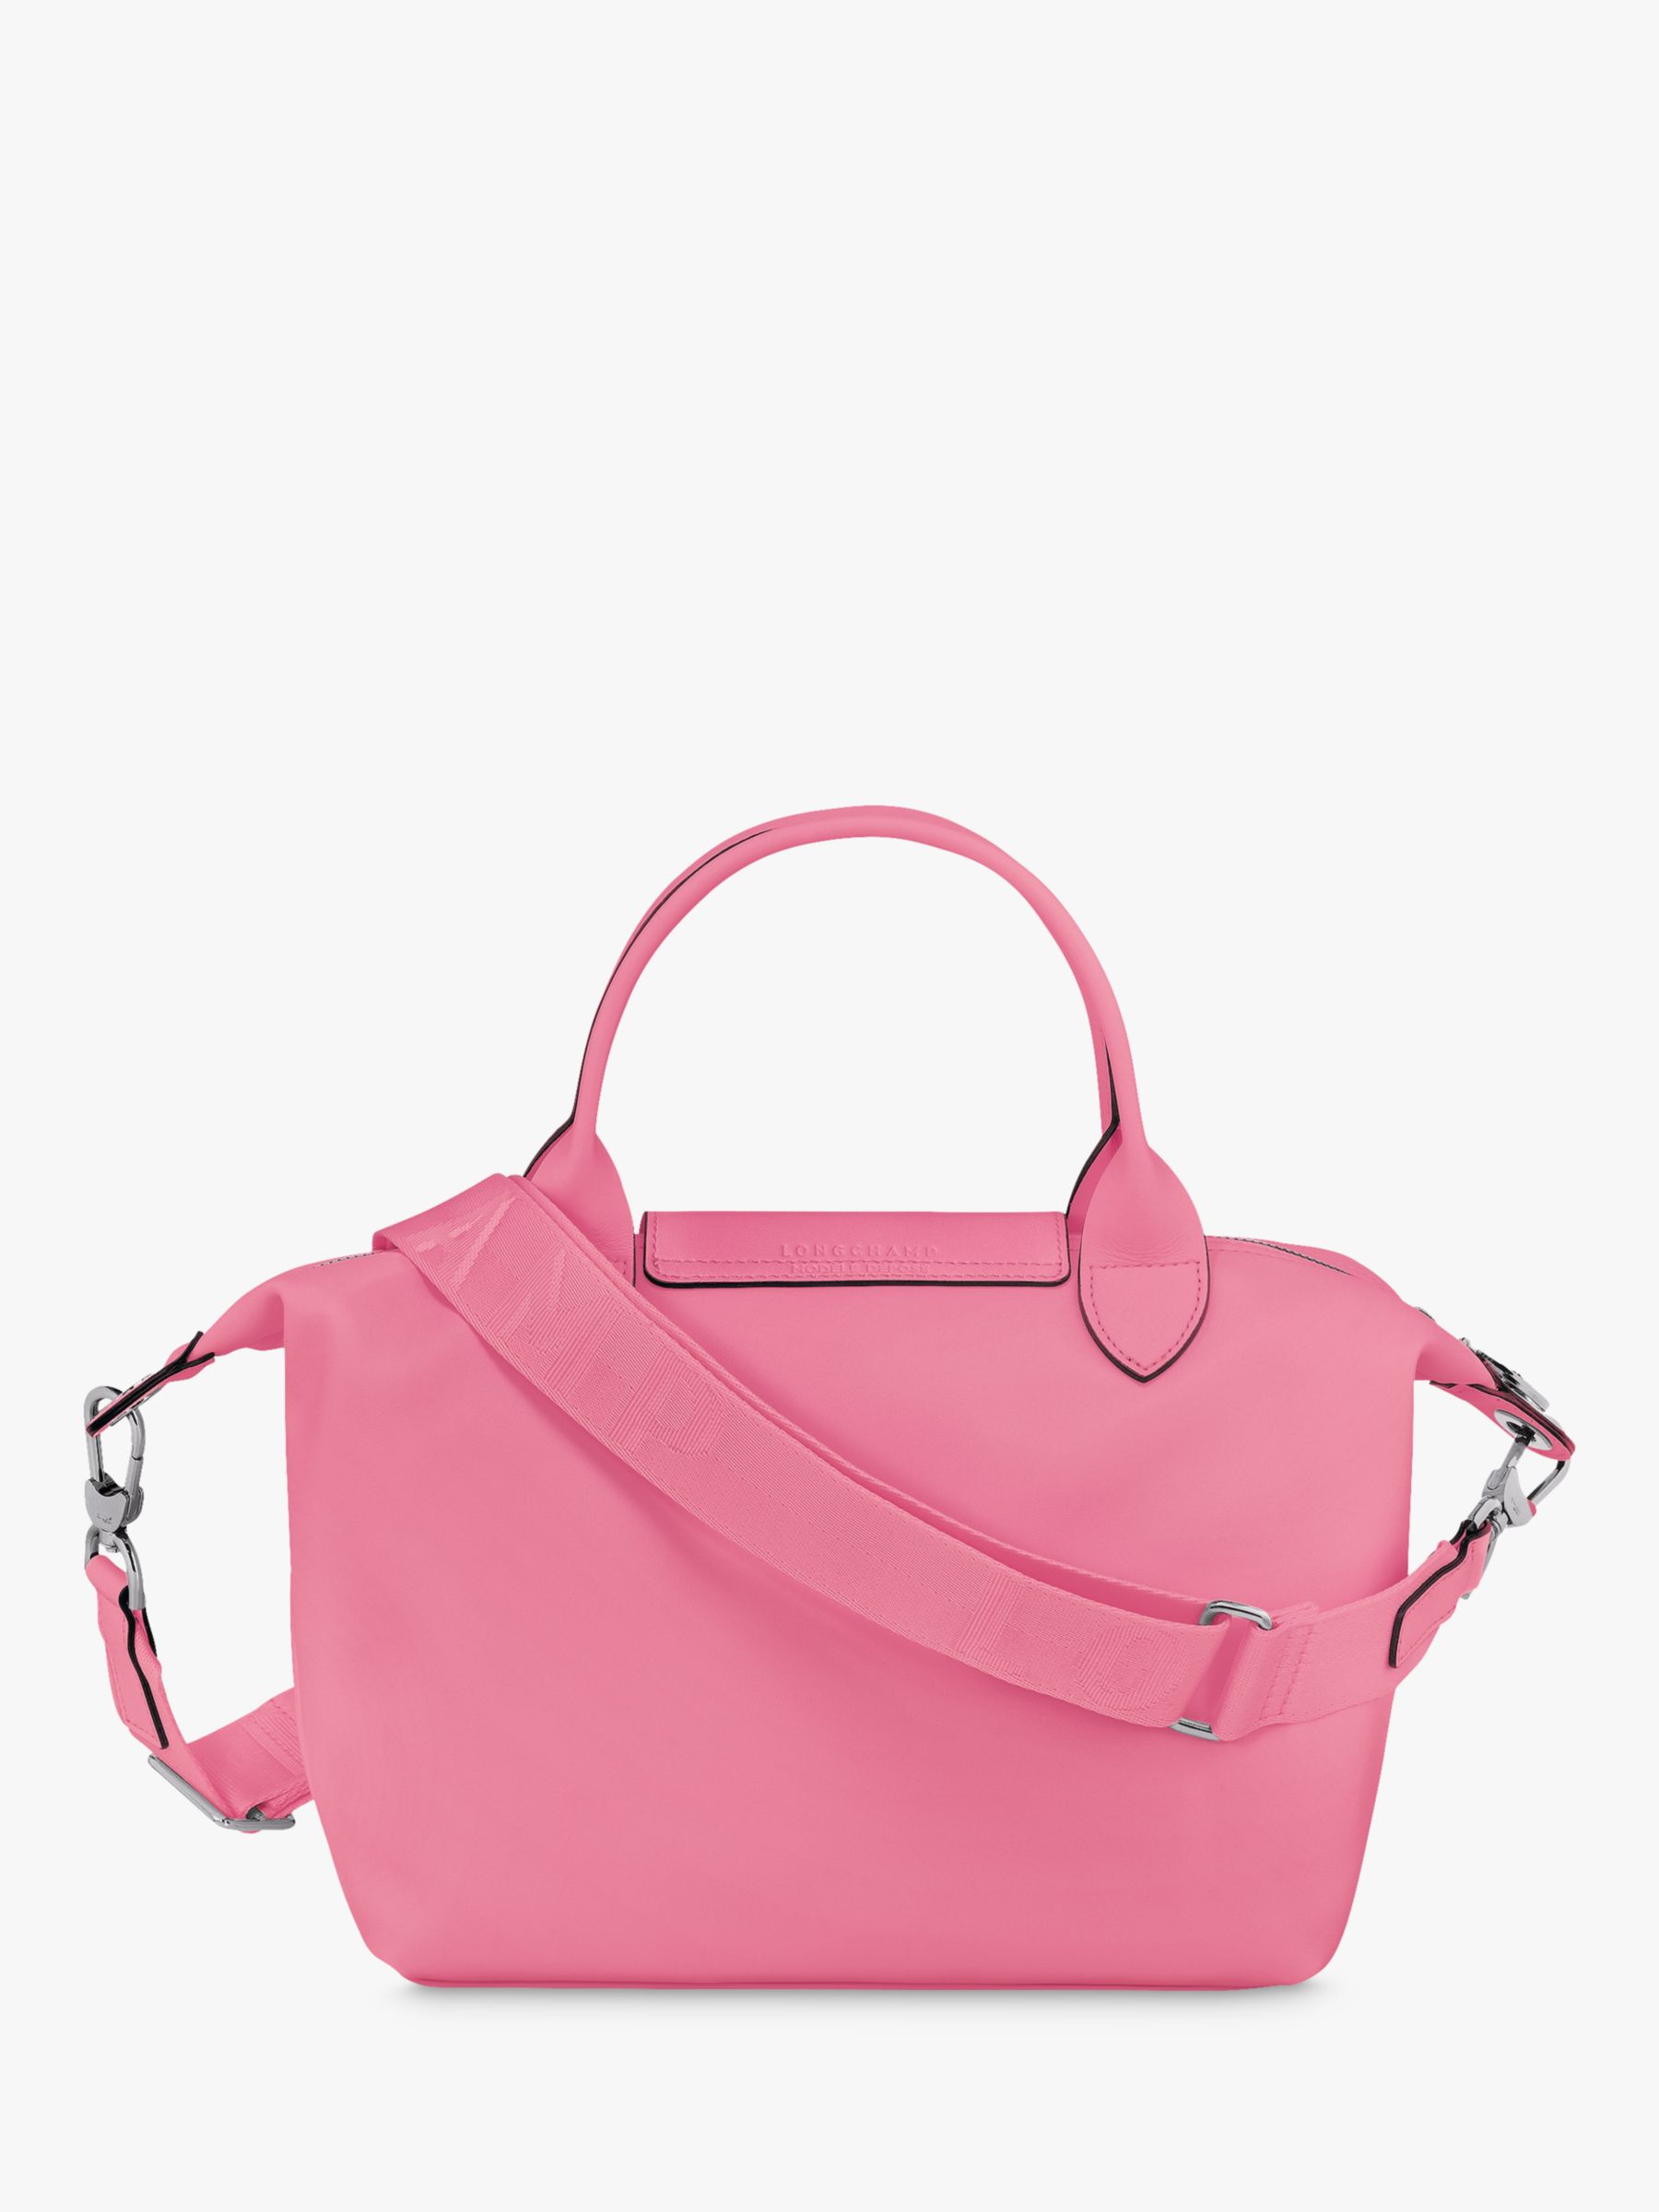 Longchamp Le Pliage Xtra Small Tote Bag in Natural